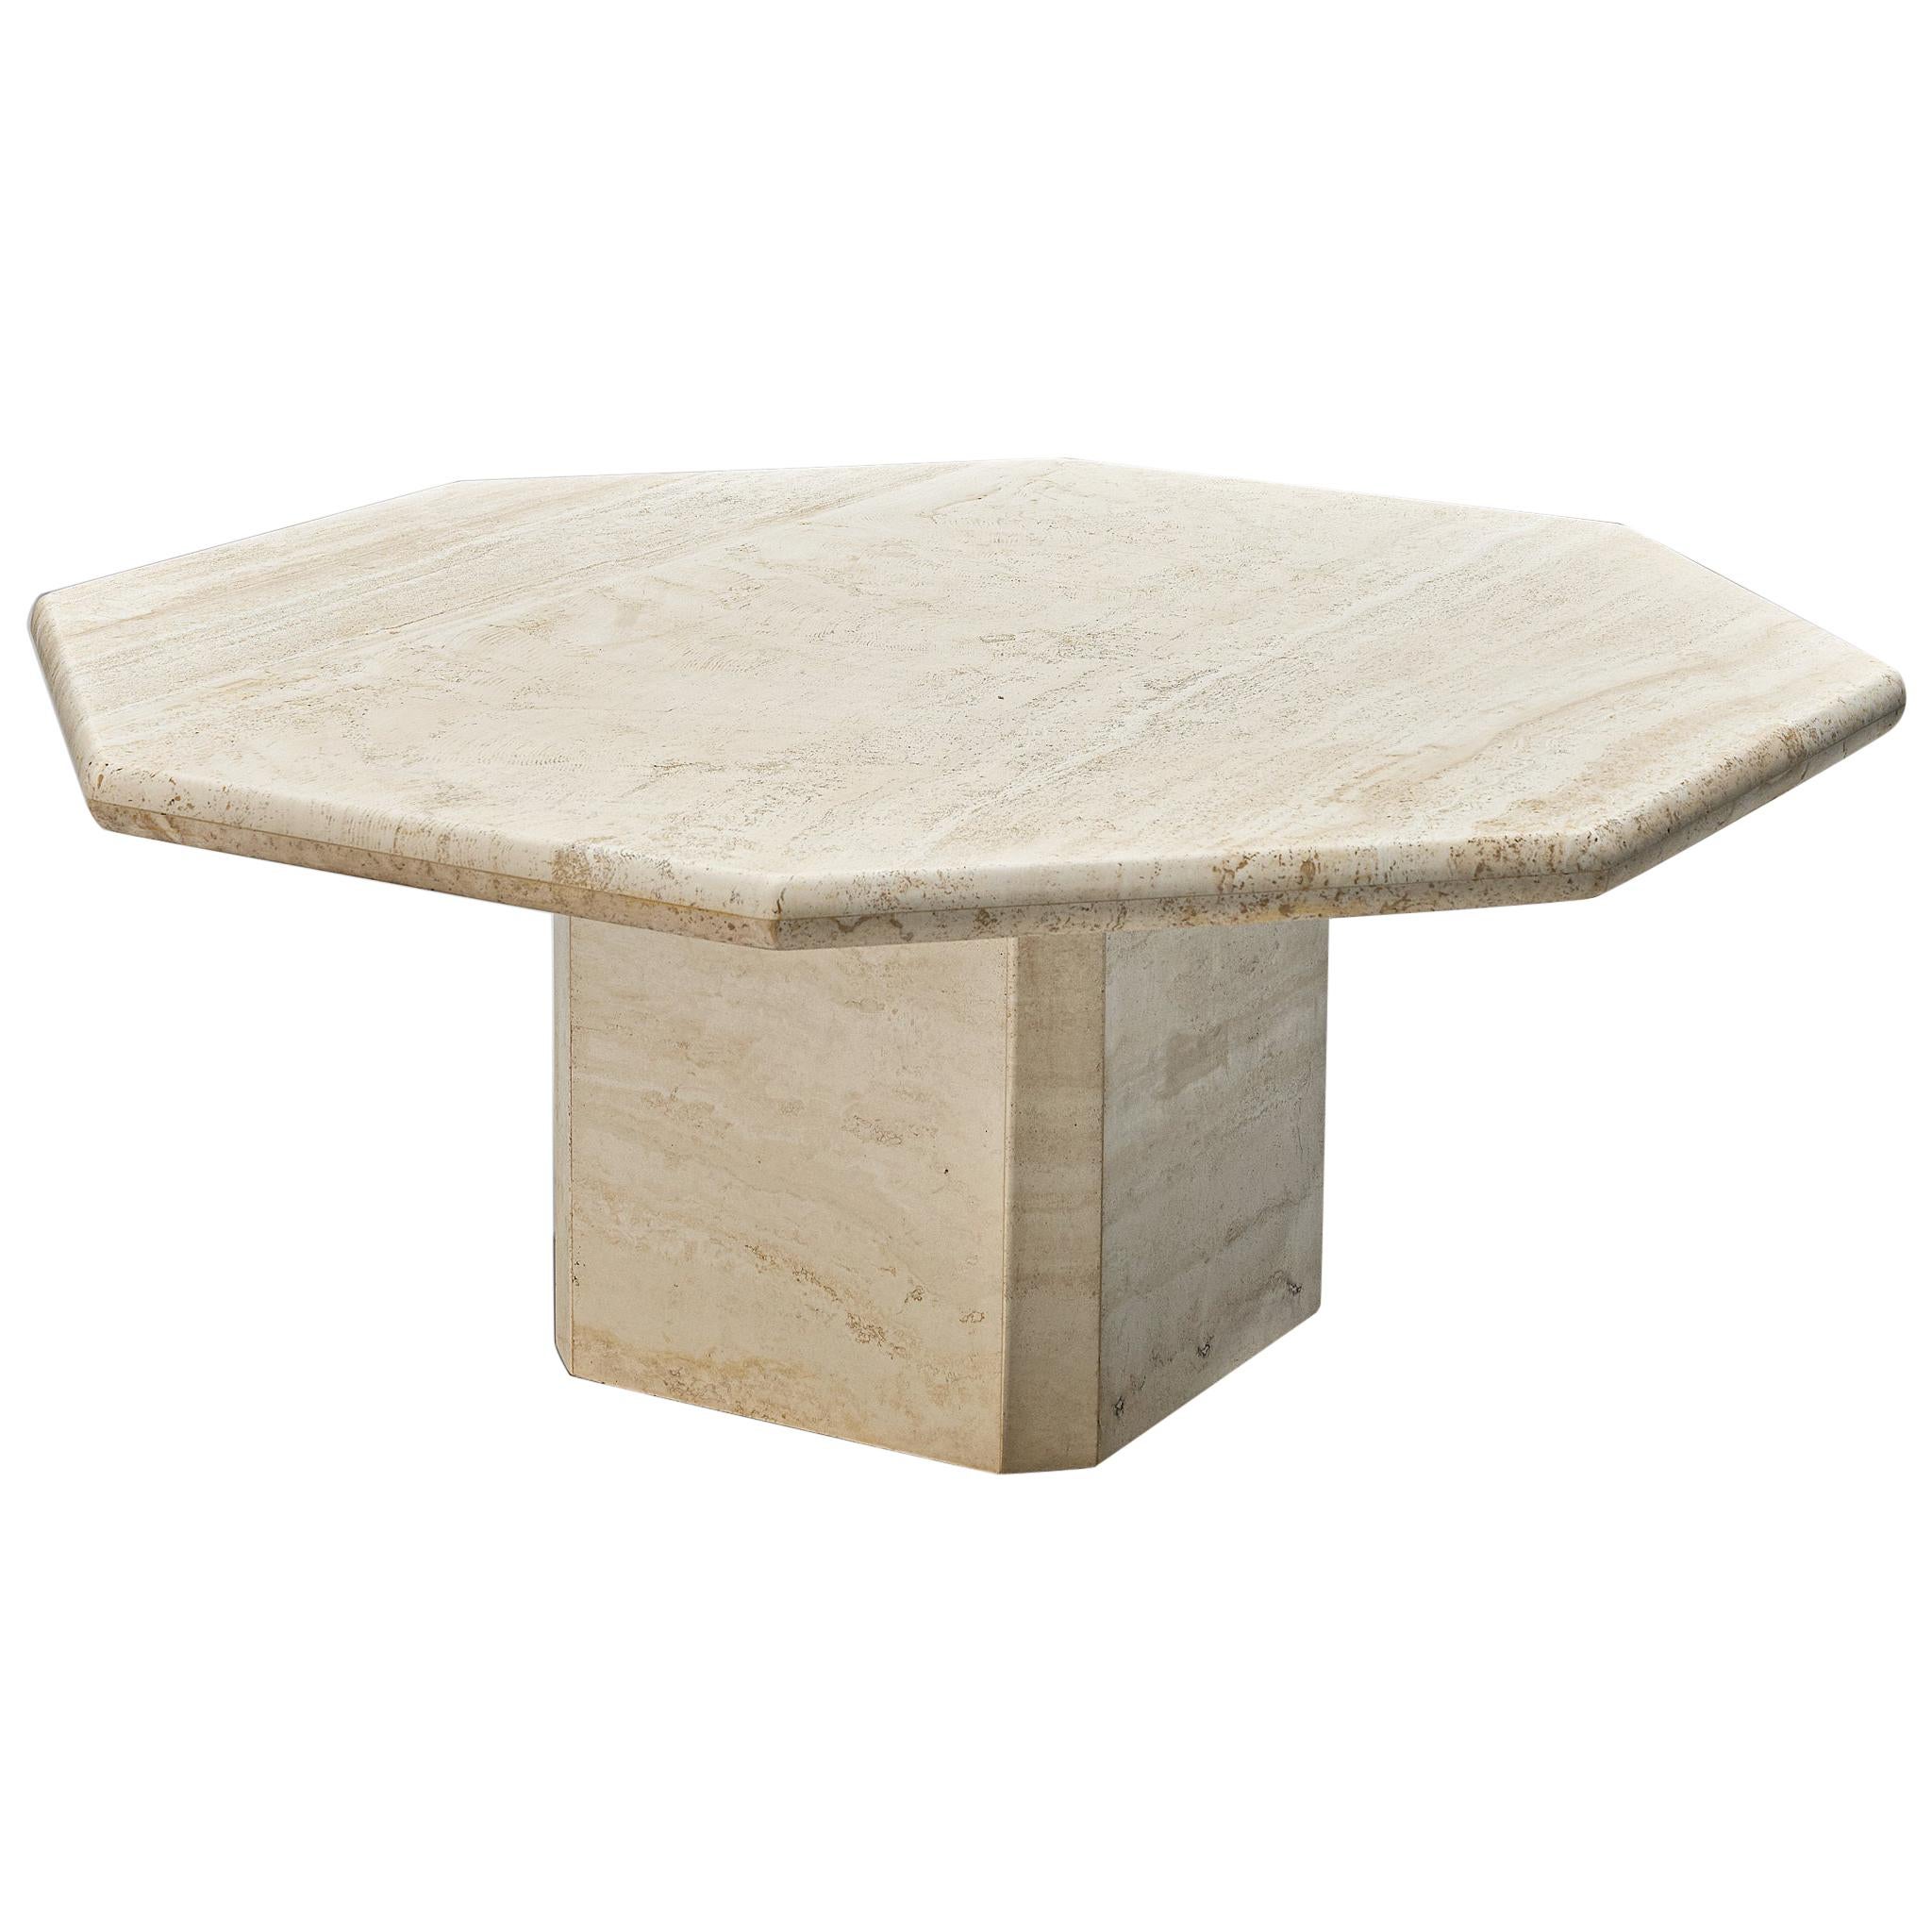 Octagonal Coffee Table in Travertine